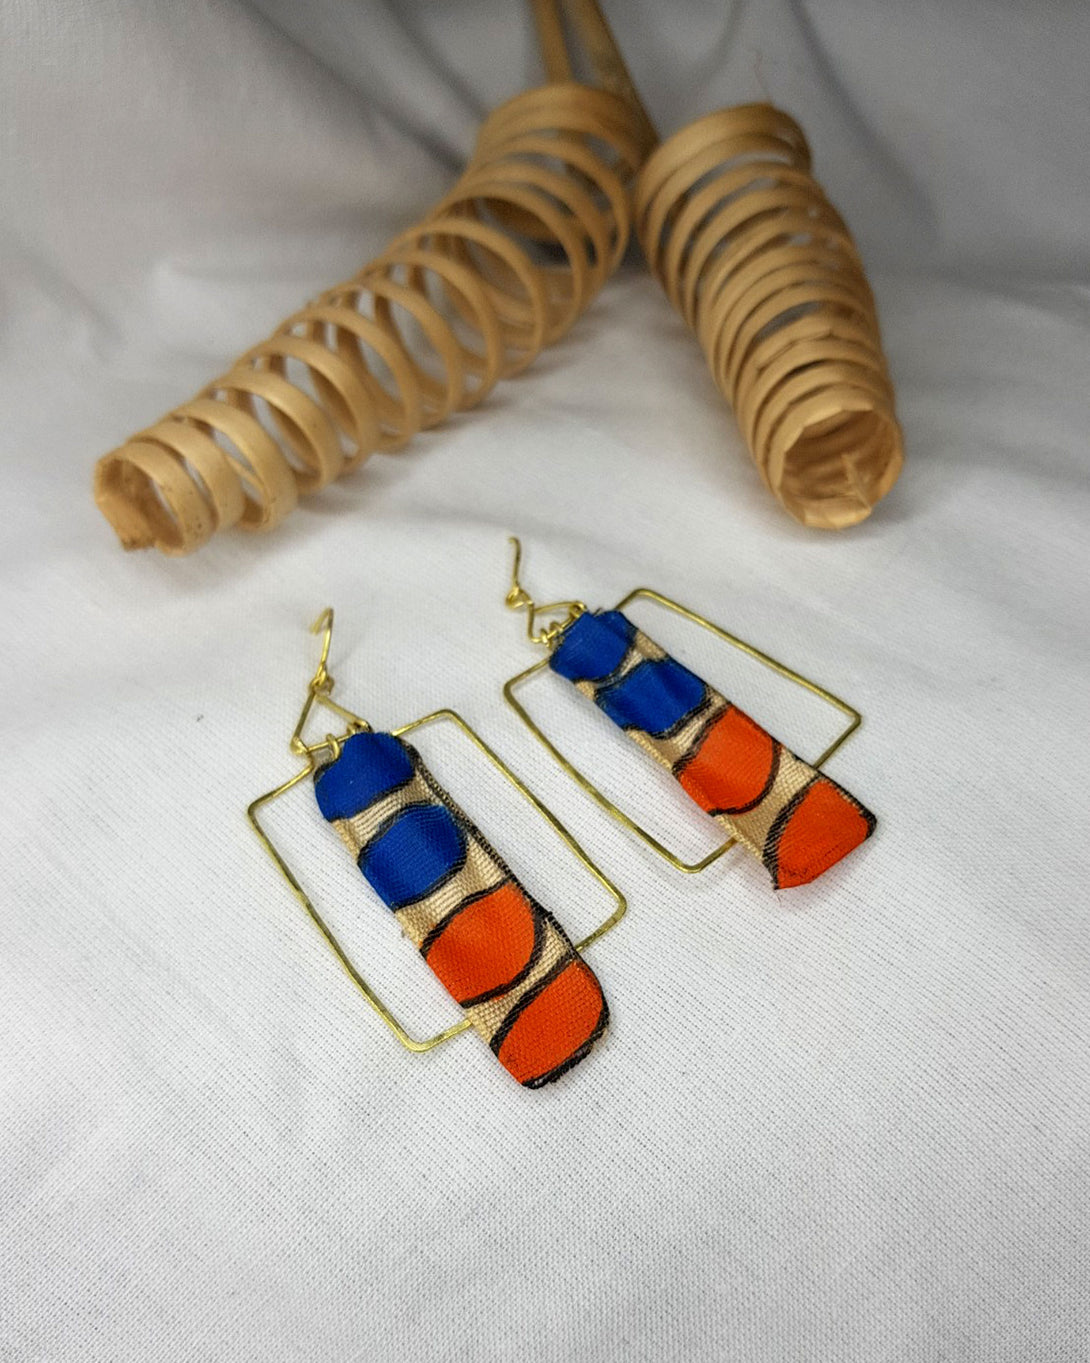 Mithila Tales Bijou Upcycled Handmade Earrings 2 from our zero waste store